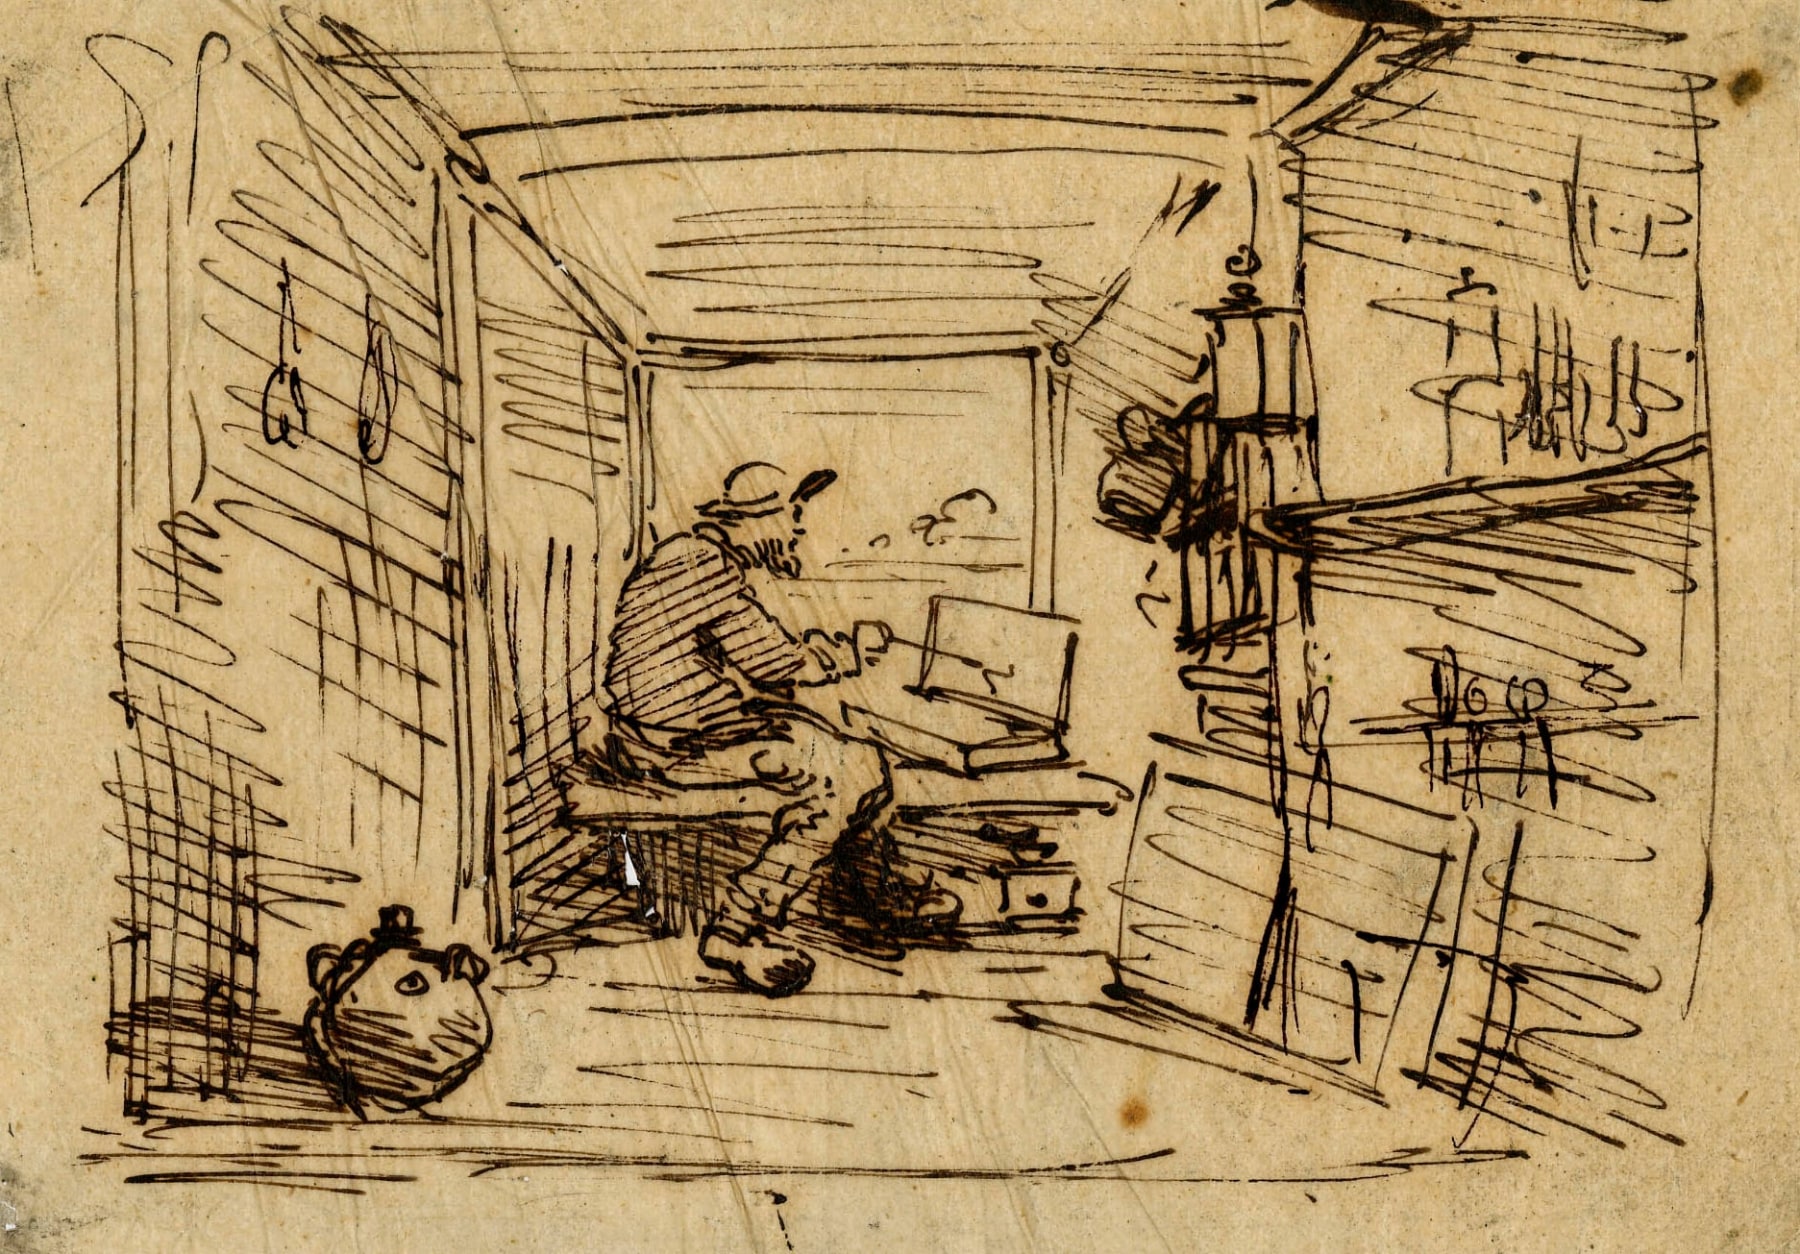 Charles F. Daubigny, Le Bateau Atelier    Pen and ink on paper calque 4 1/2 x 6 3/8 inches